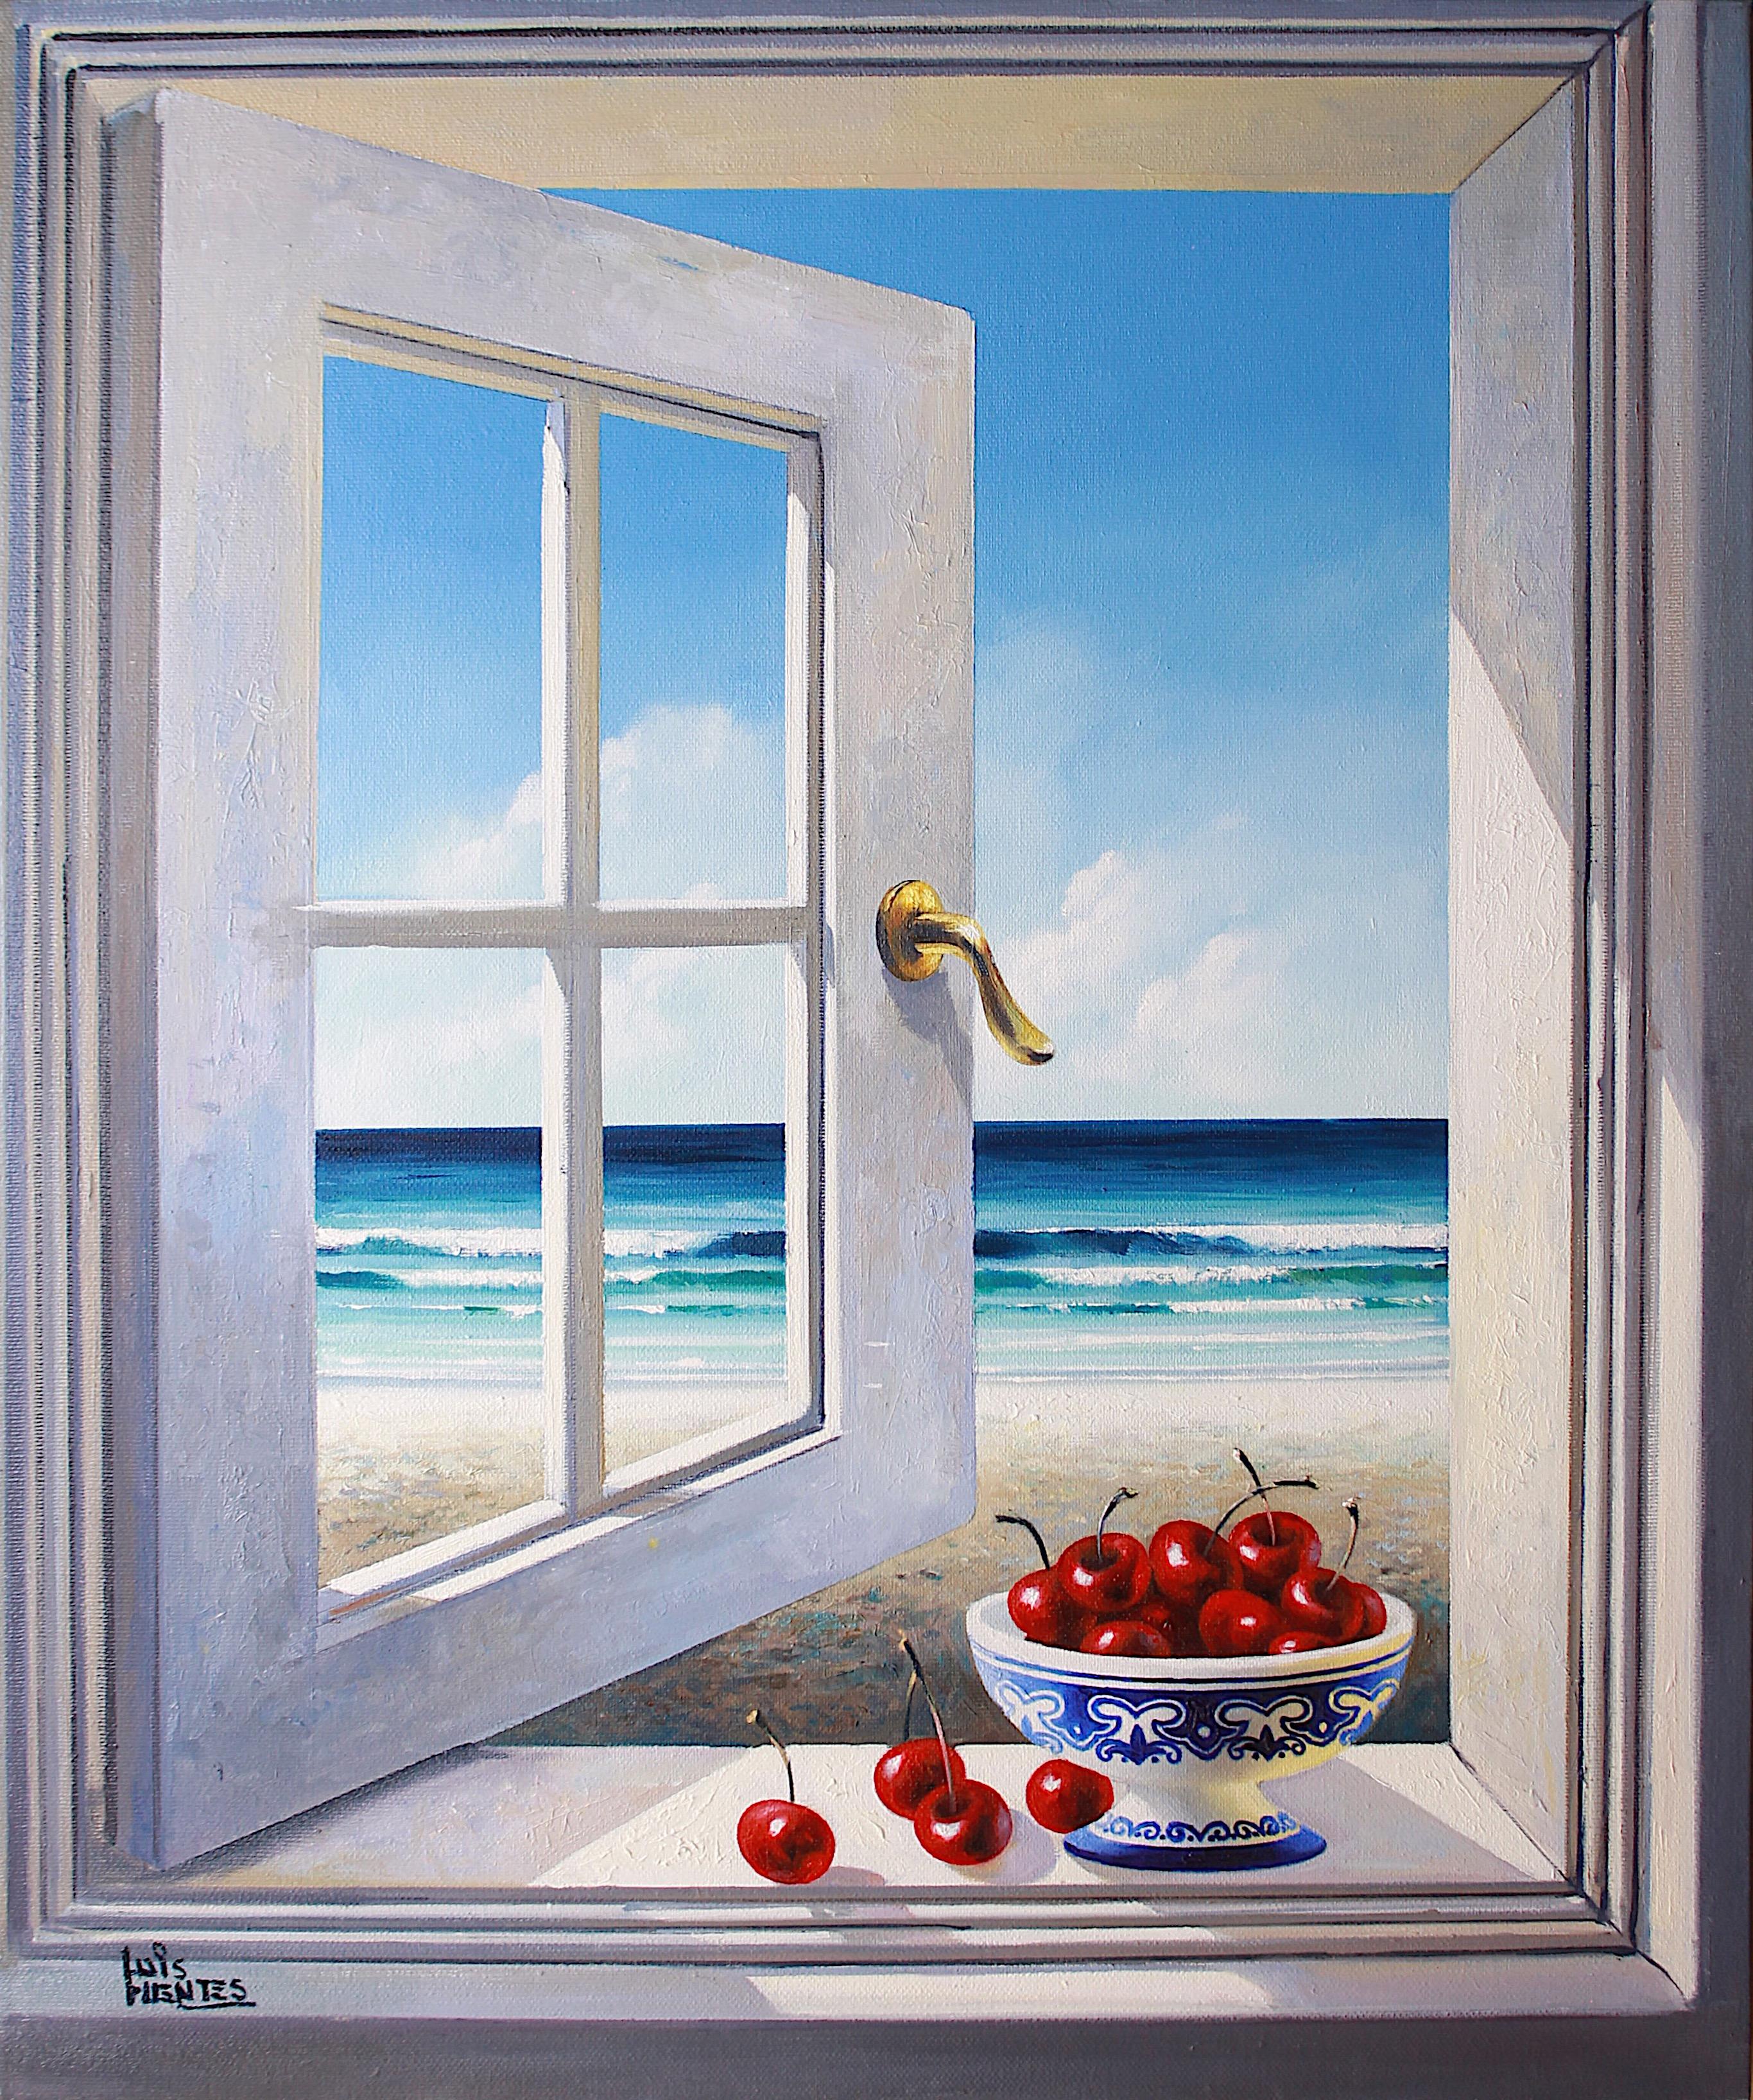 Luis Fuentes Landscape Painting - Cherries on the window - Original oil painting - Contemporary art